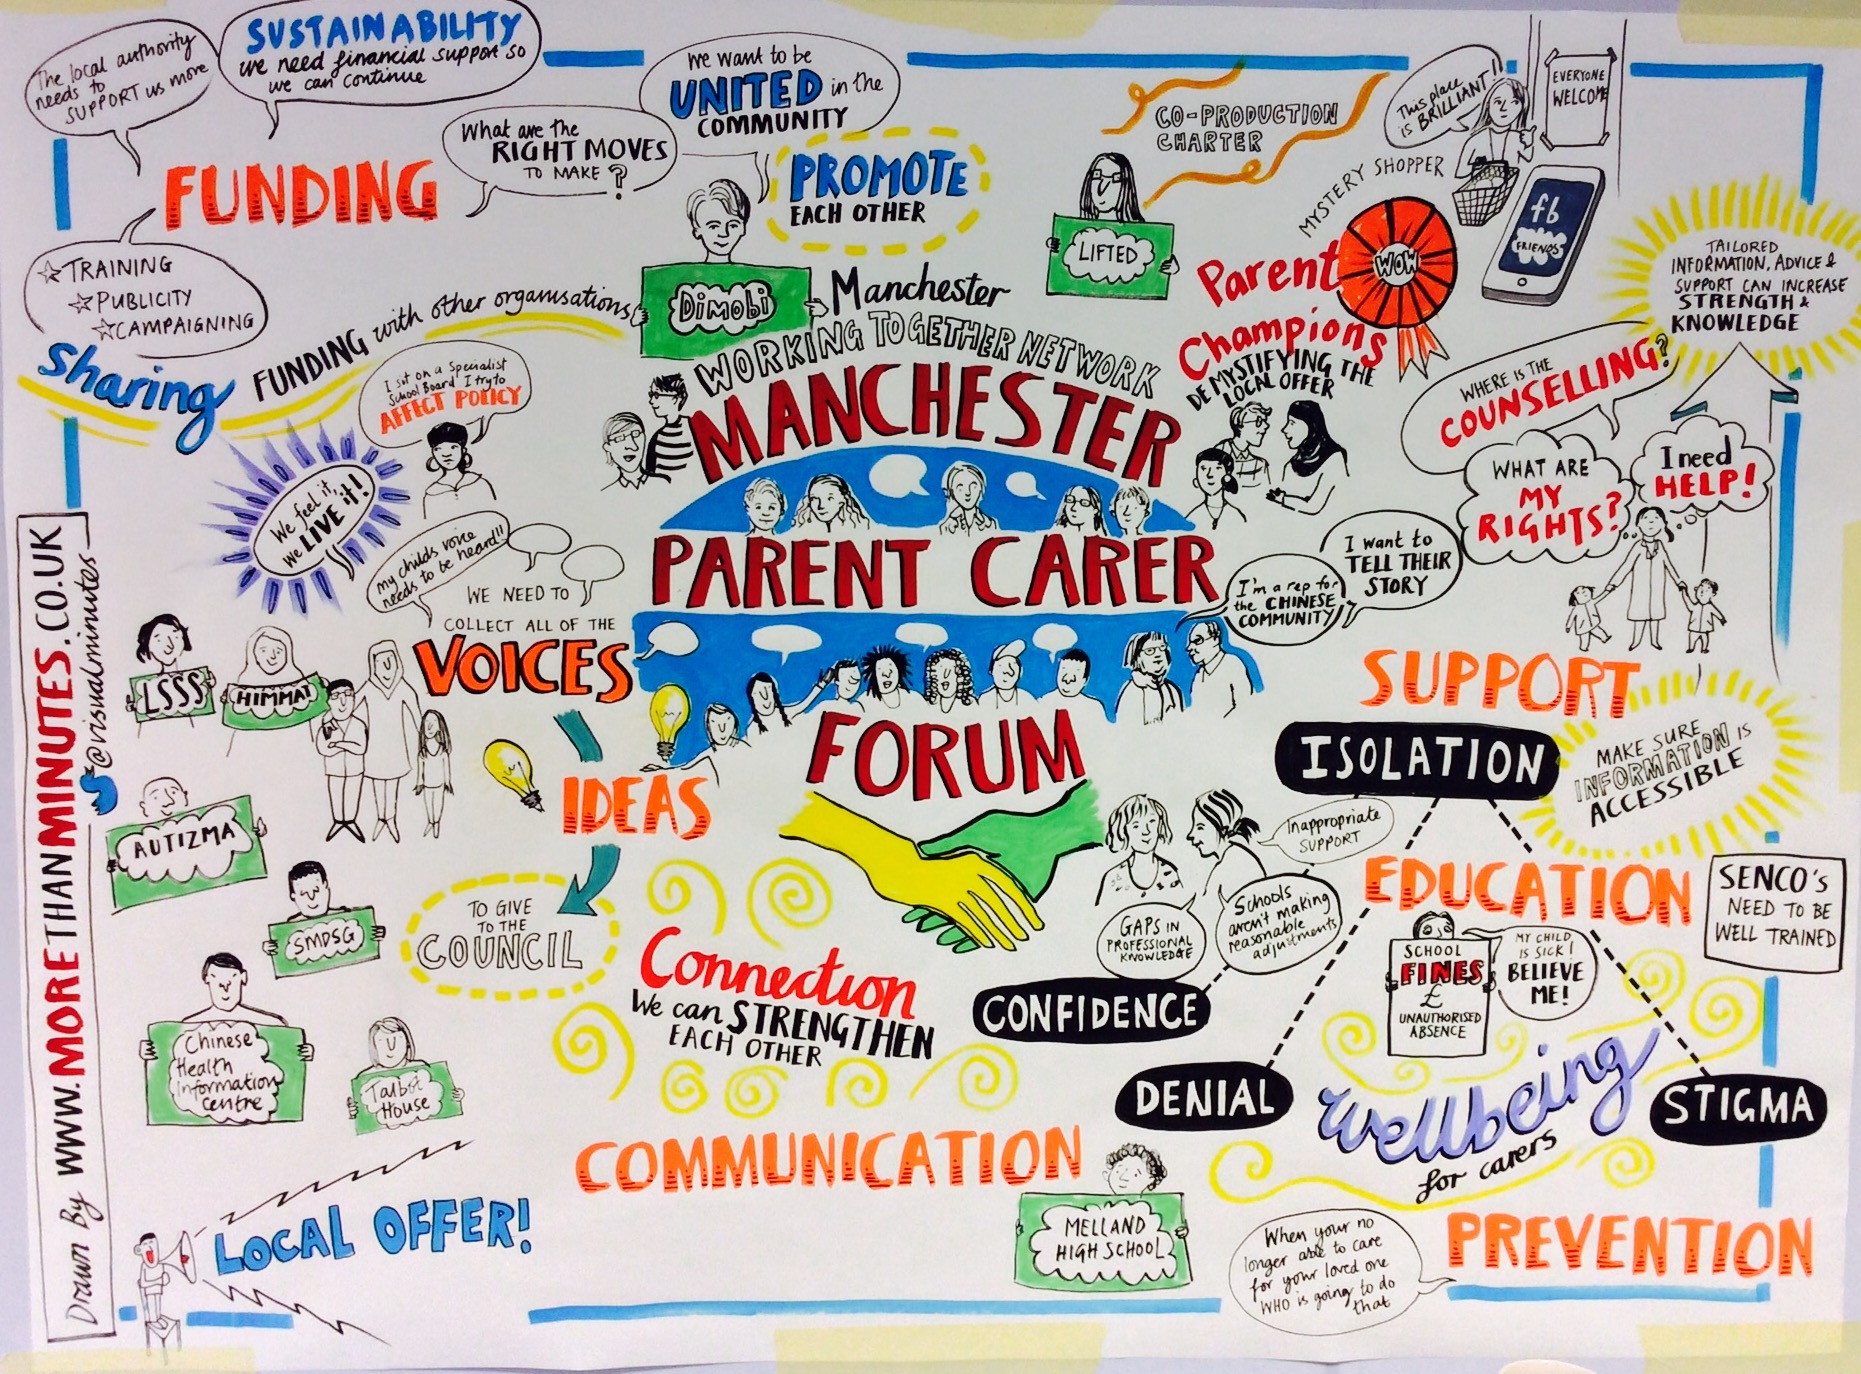 visual minutes of the MWTN meeting on 3 October 2018, as illustrated by morethanminutes.co.uk